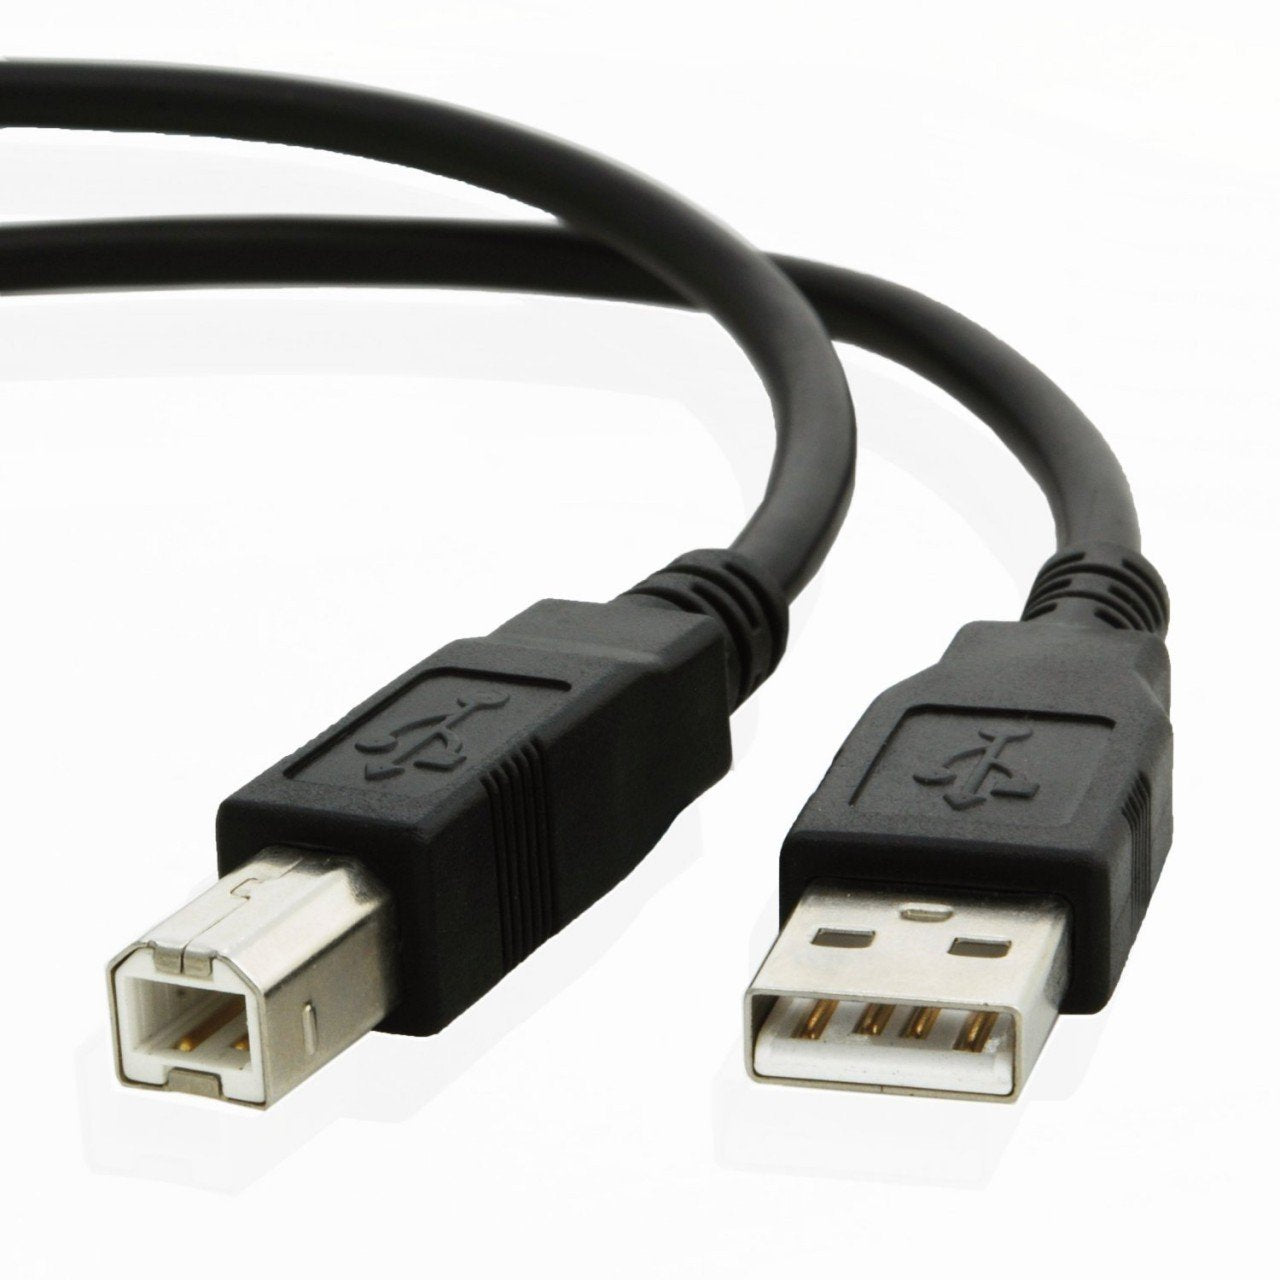 USB cable for Casio DIGITAL PIANO PX-560